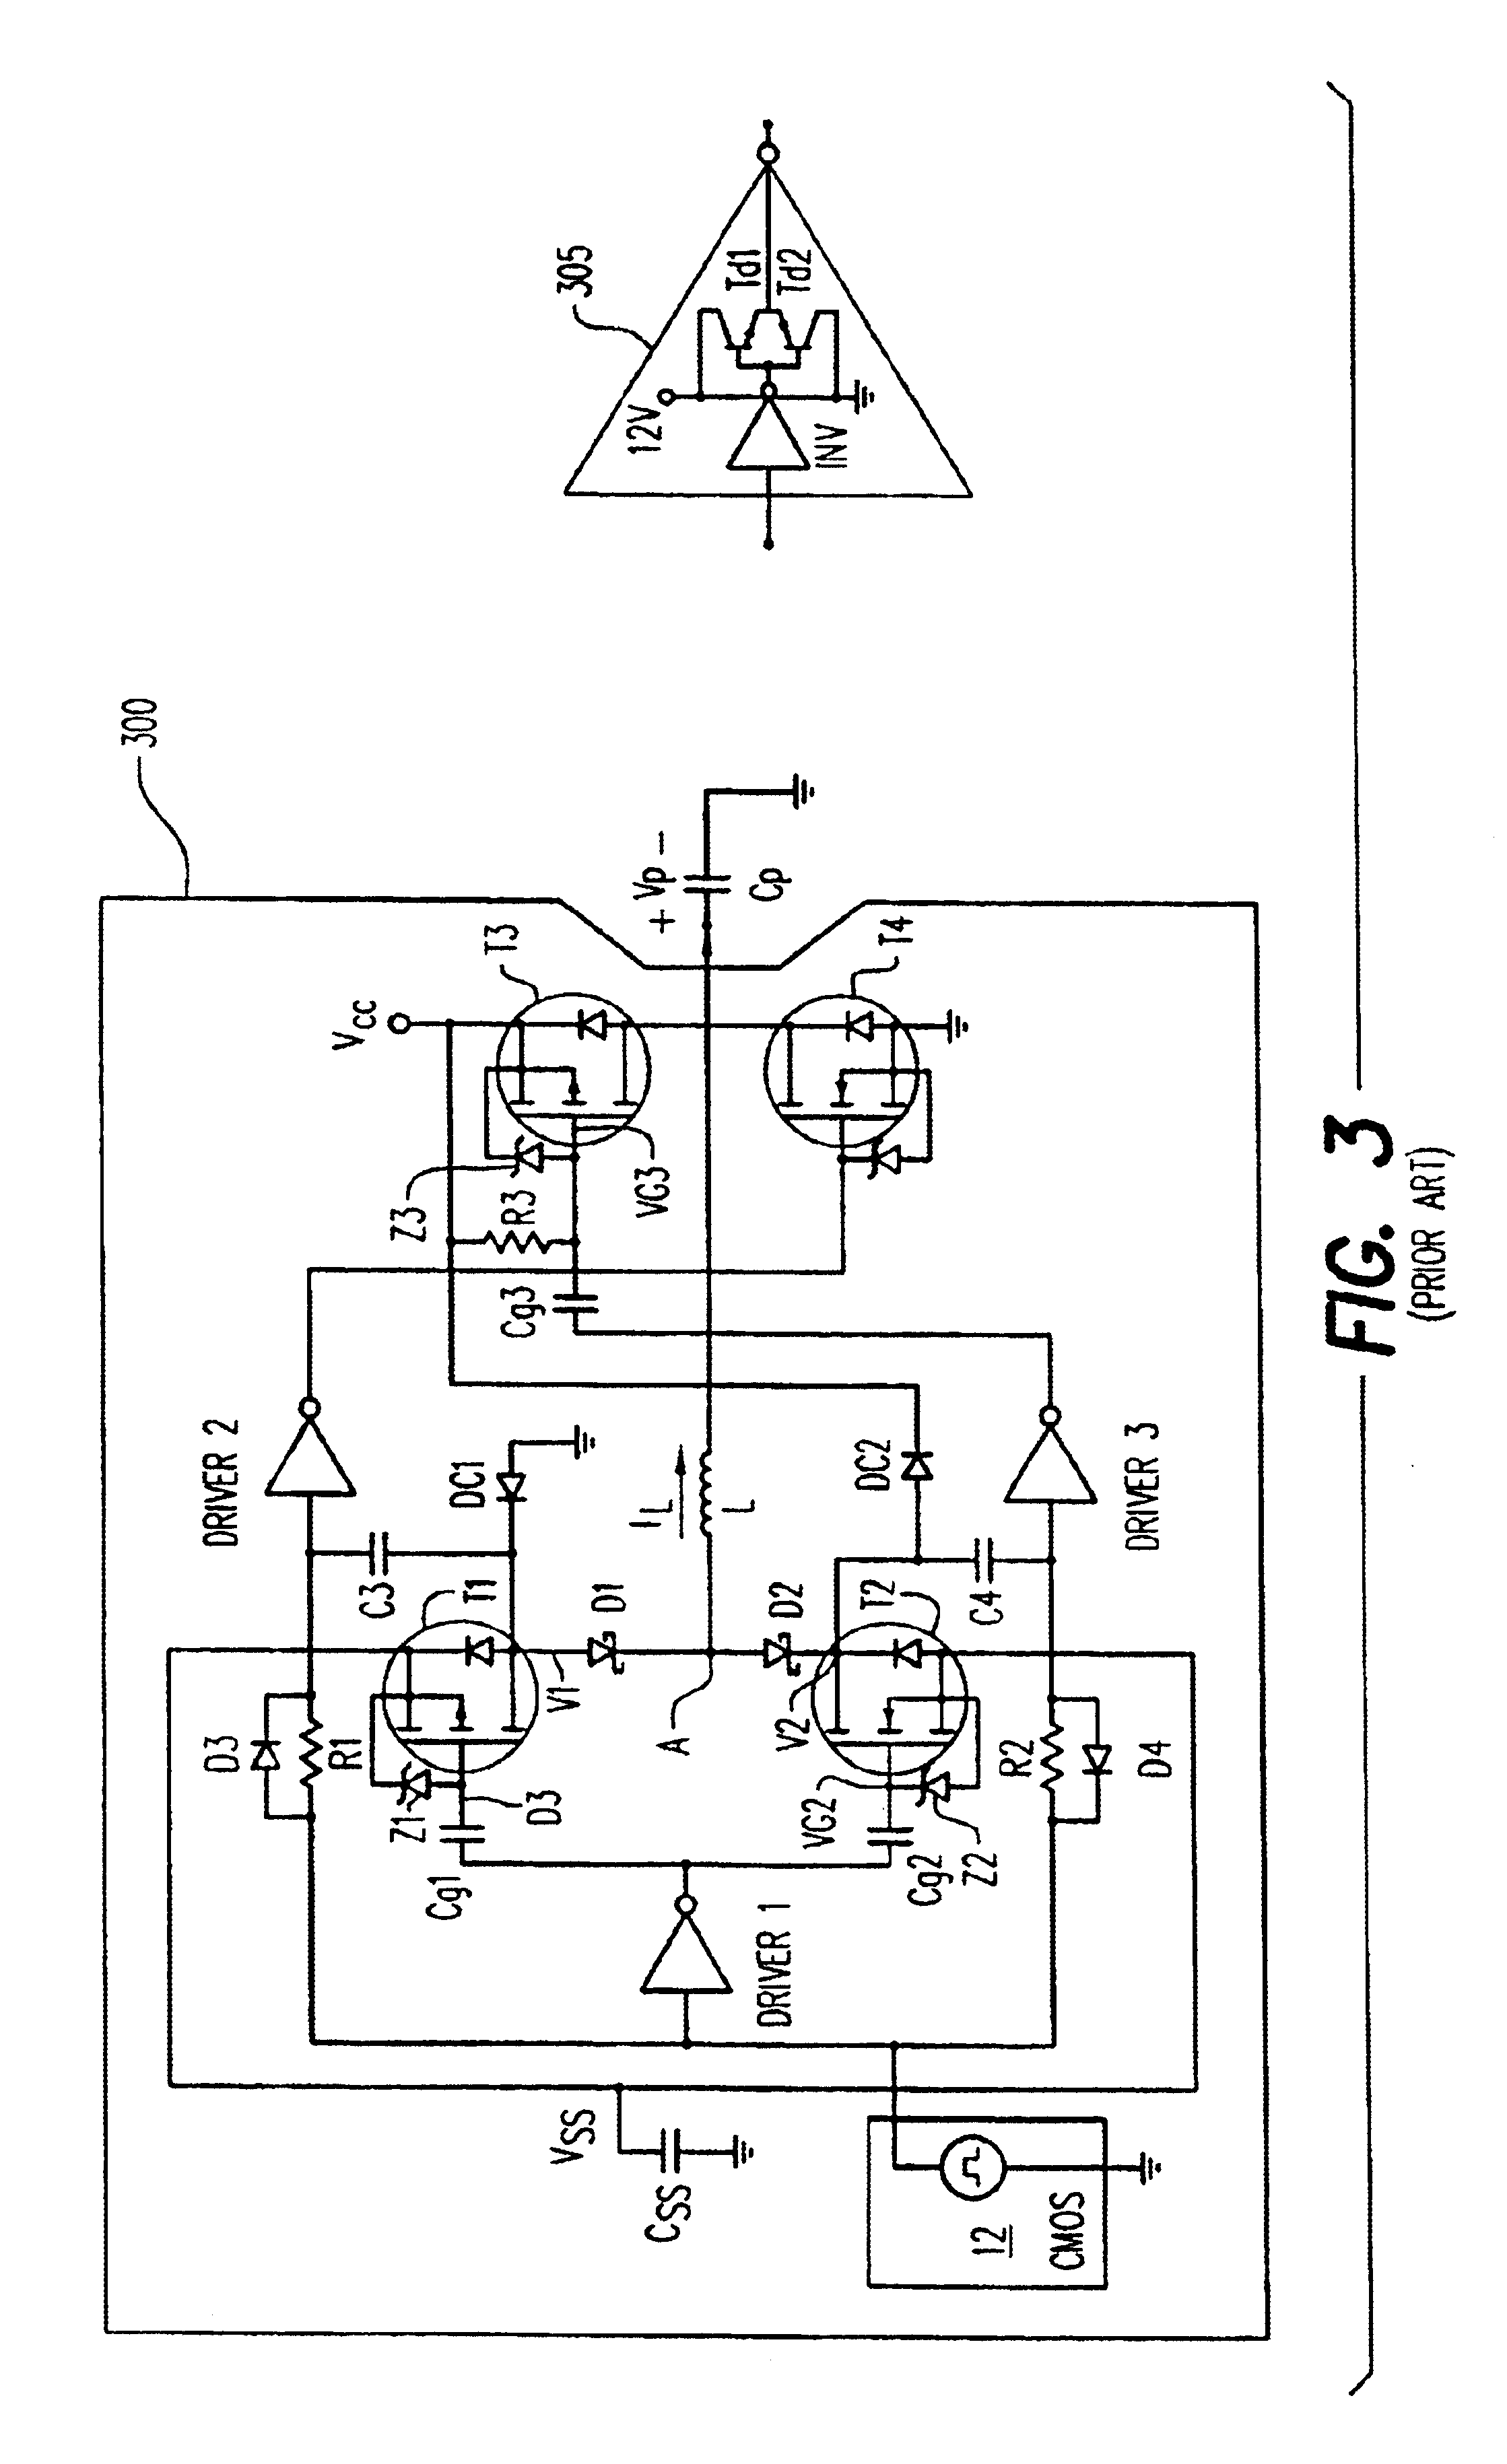 Energy recovery circuit for driving a capacitive load